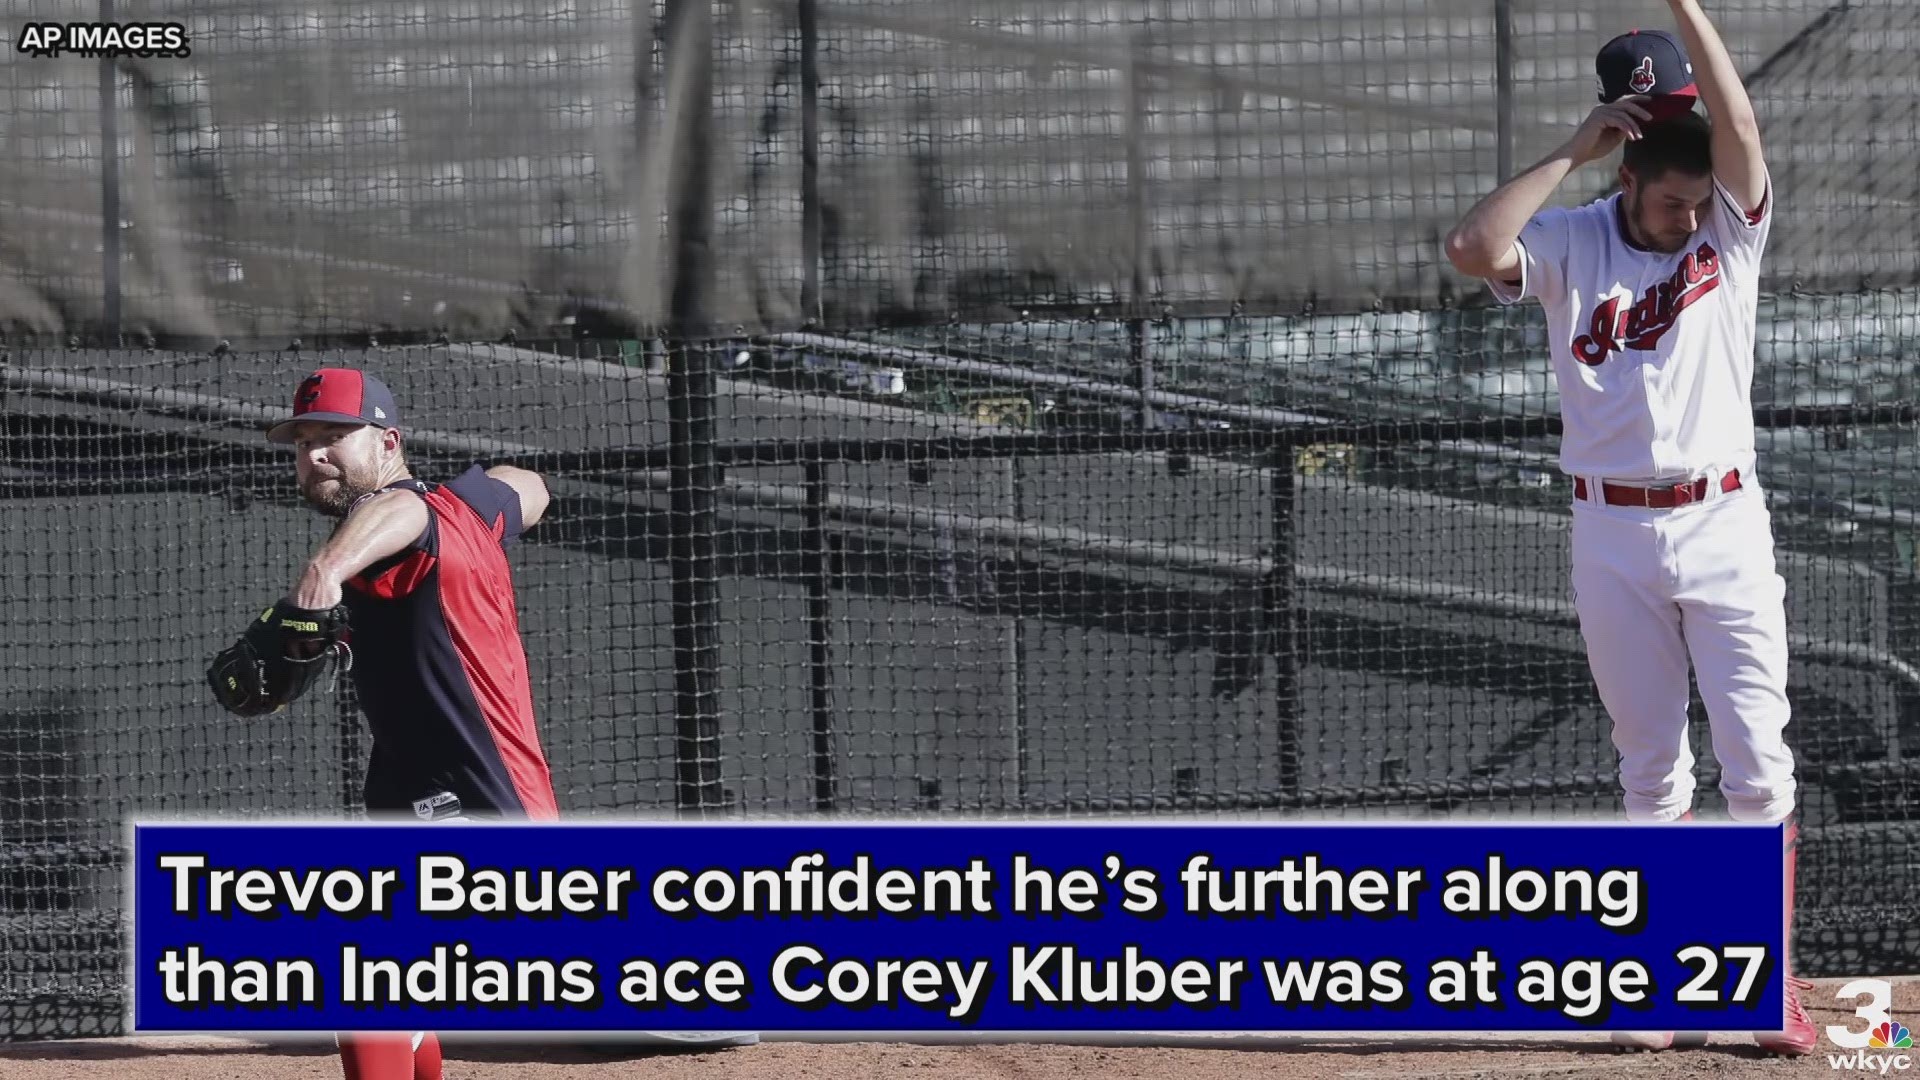 Trevor Bauer is confident that he’s further along in his career than Cleveland Indians ace Corey Kluber was at age 27.